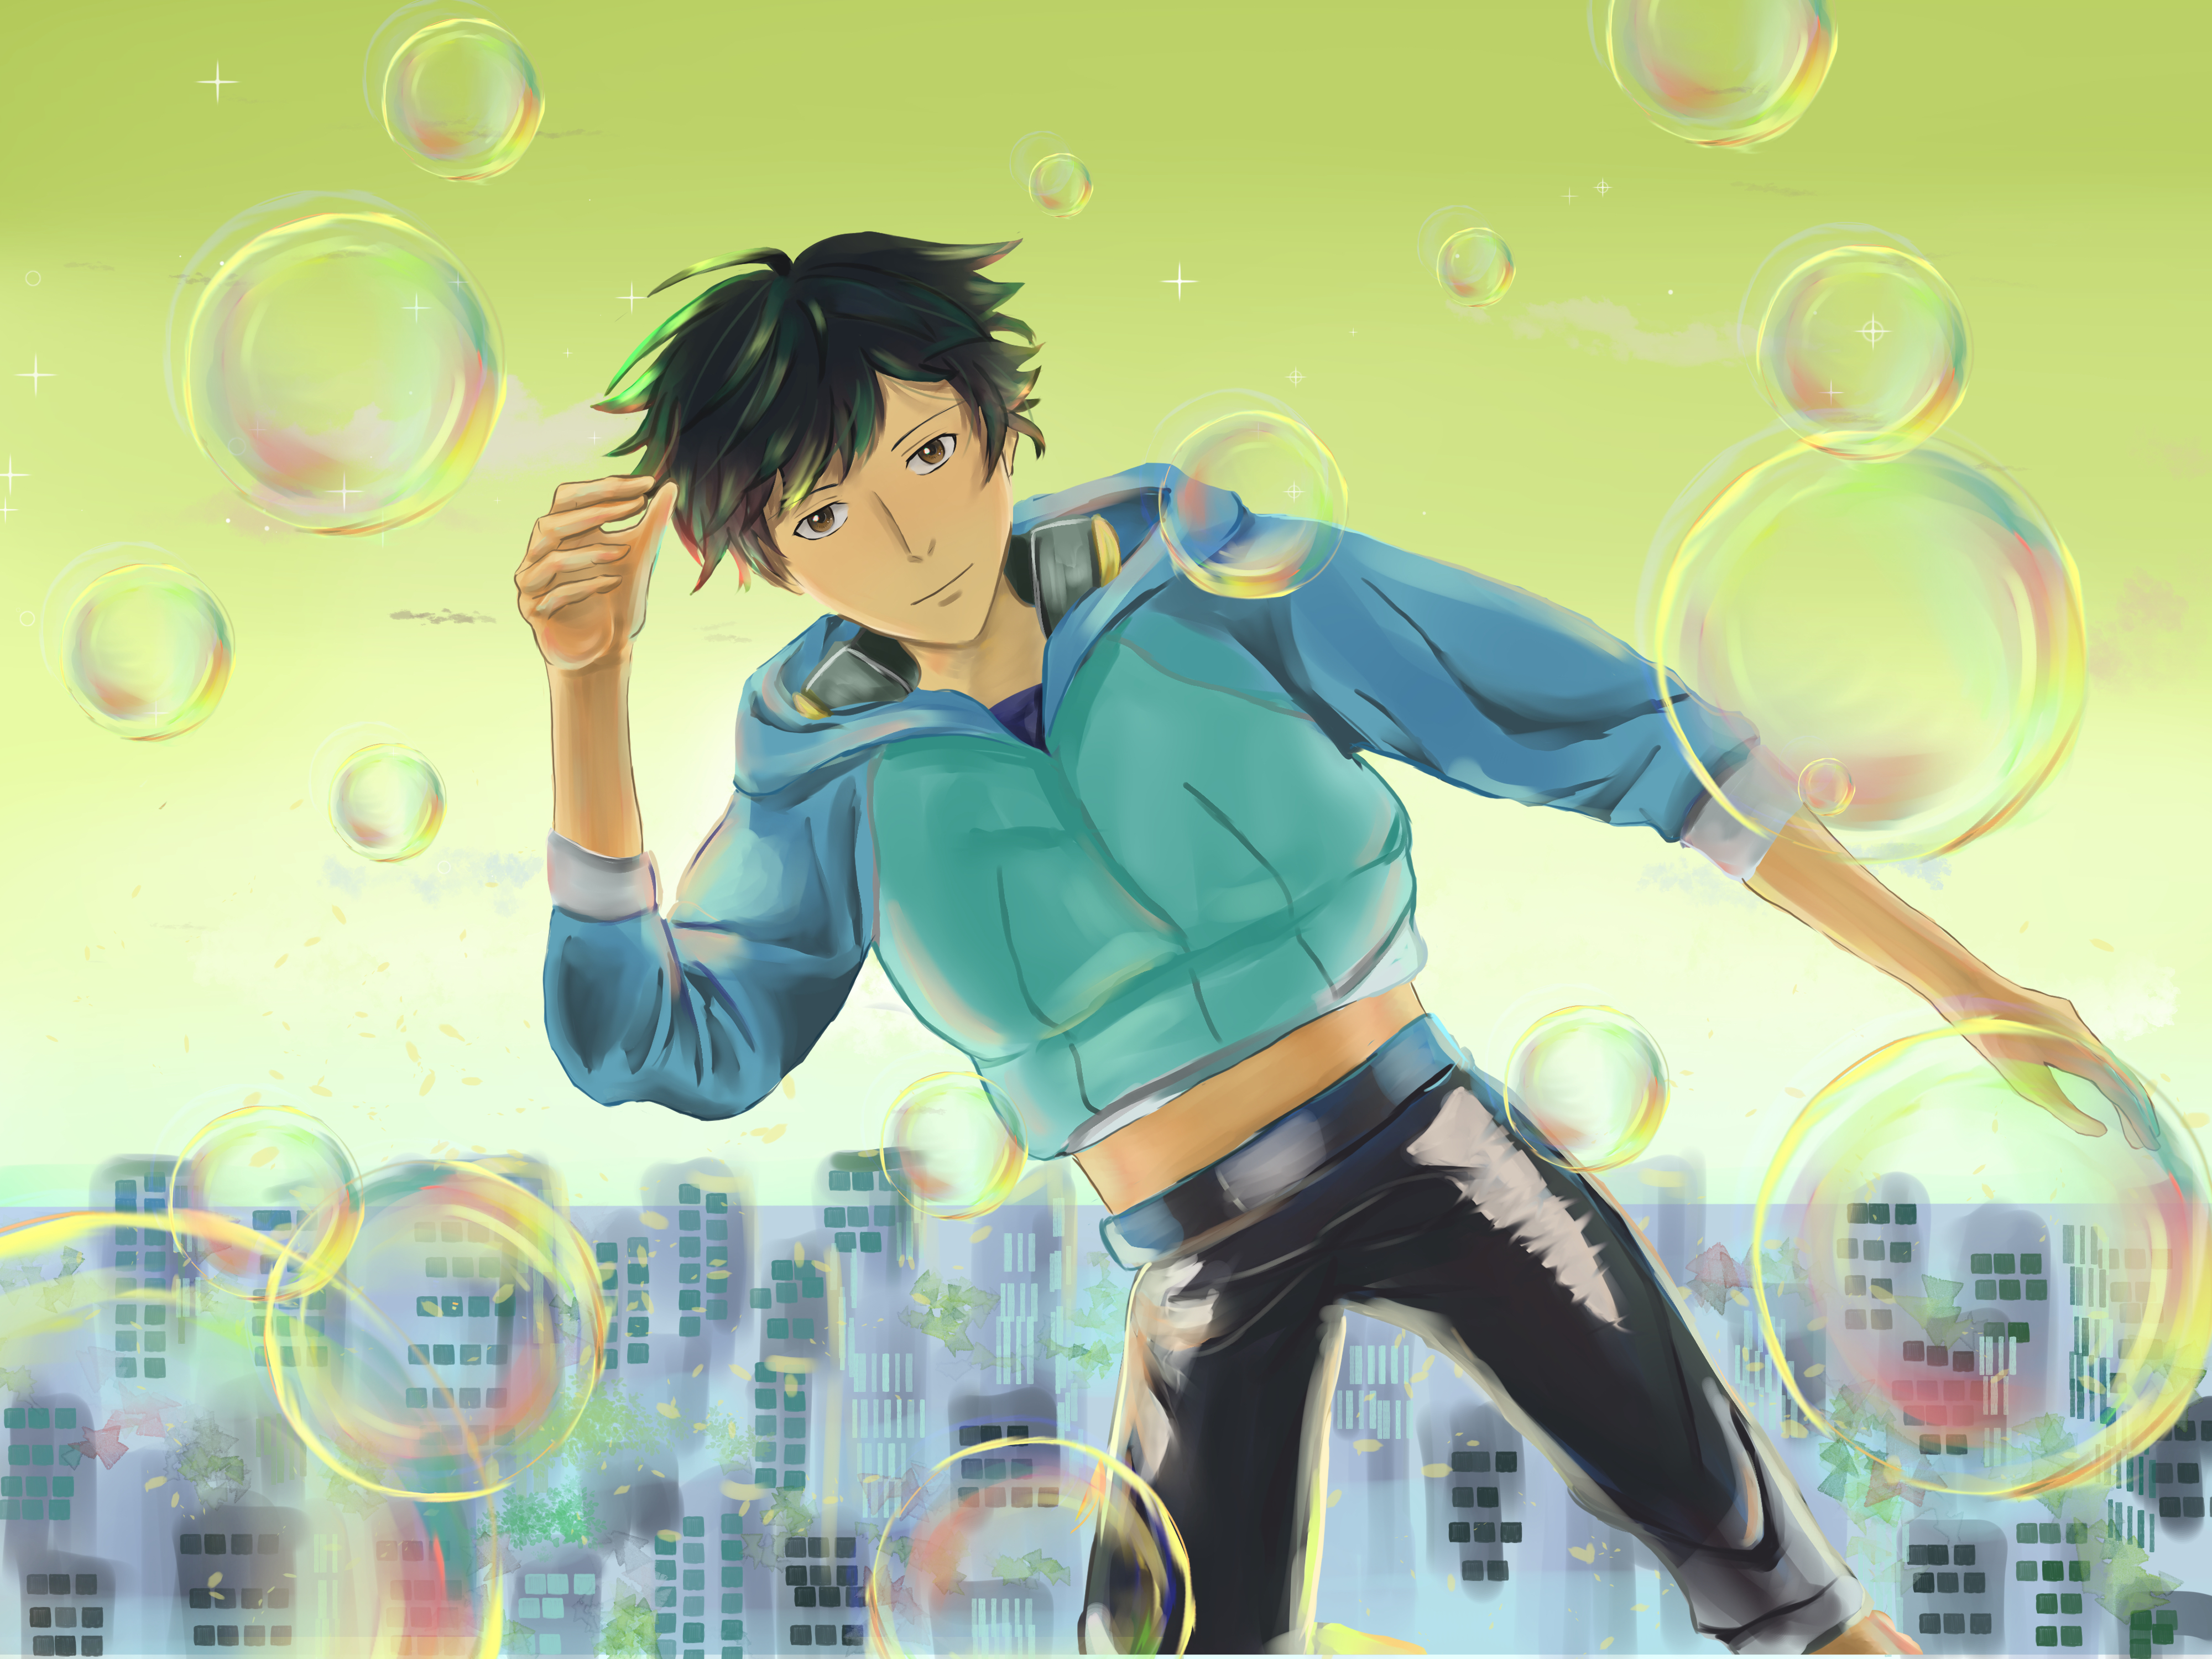 Bubbles - Other & Anime Background Wallpapers on Desktop Nexus (Image  1868117)